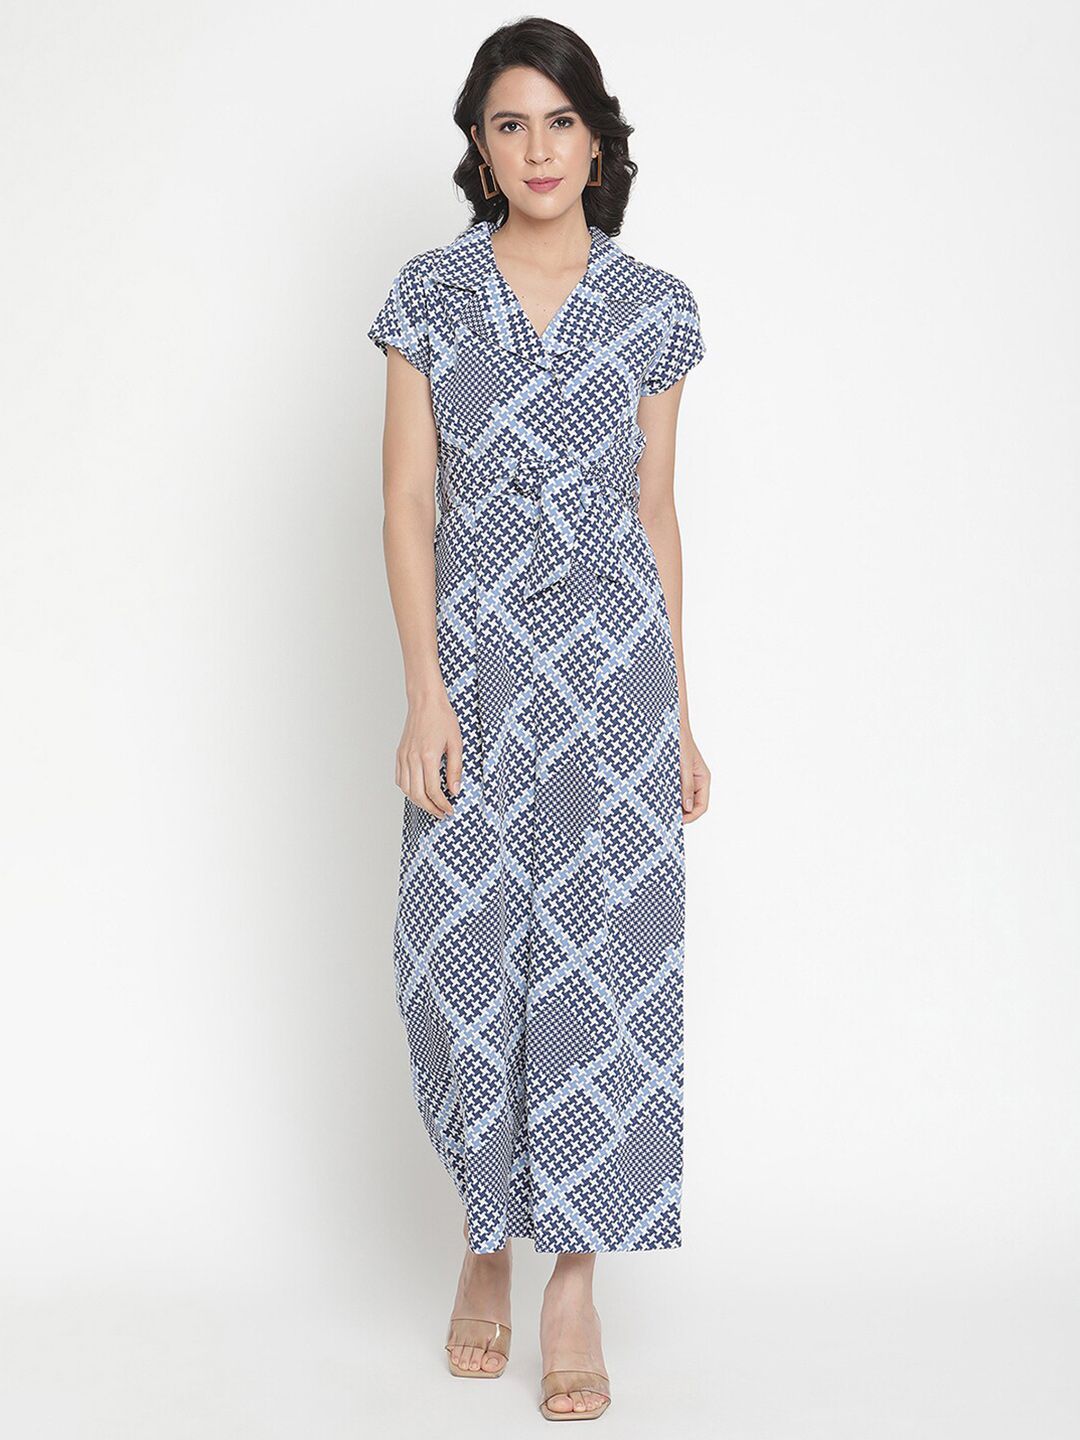 THREAD MUSTER Blue & White Printed Basic Jumpsuit Price in India